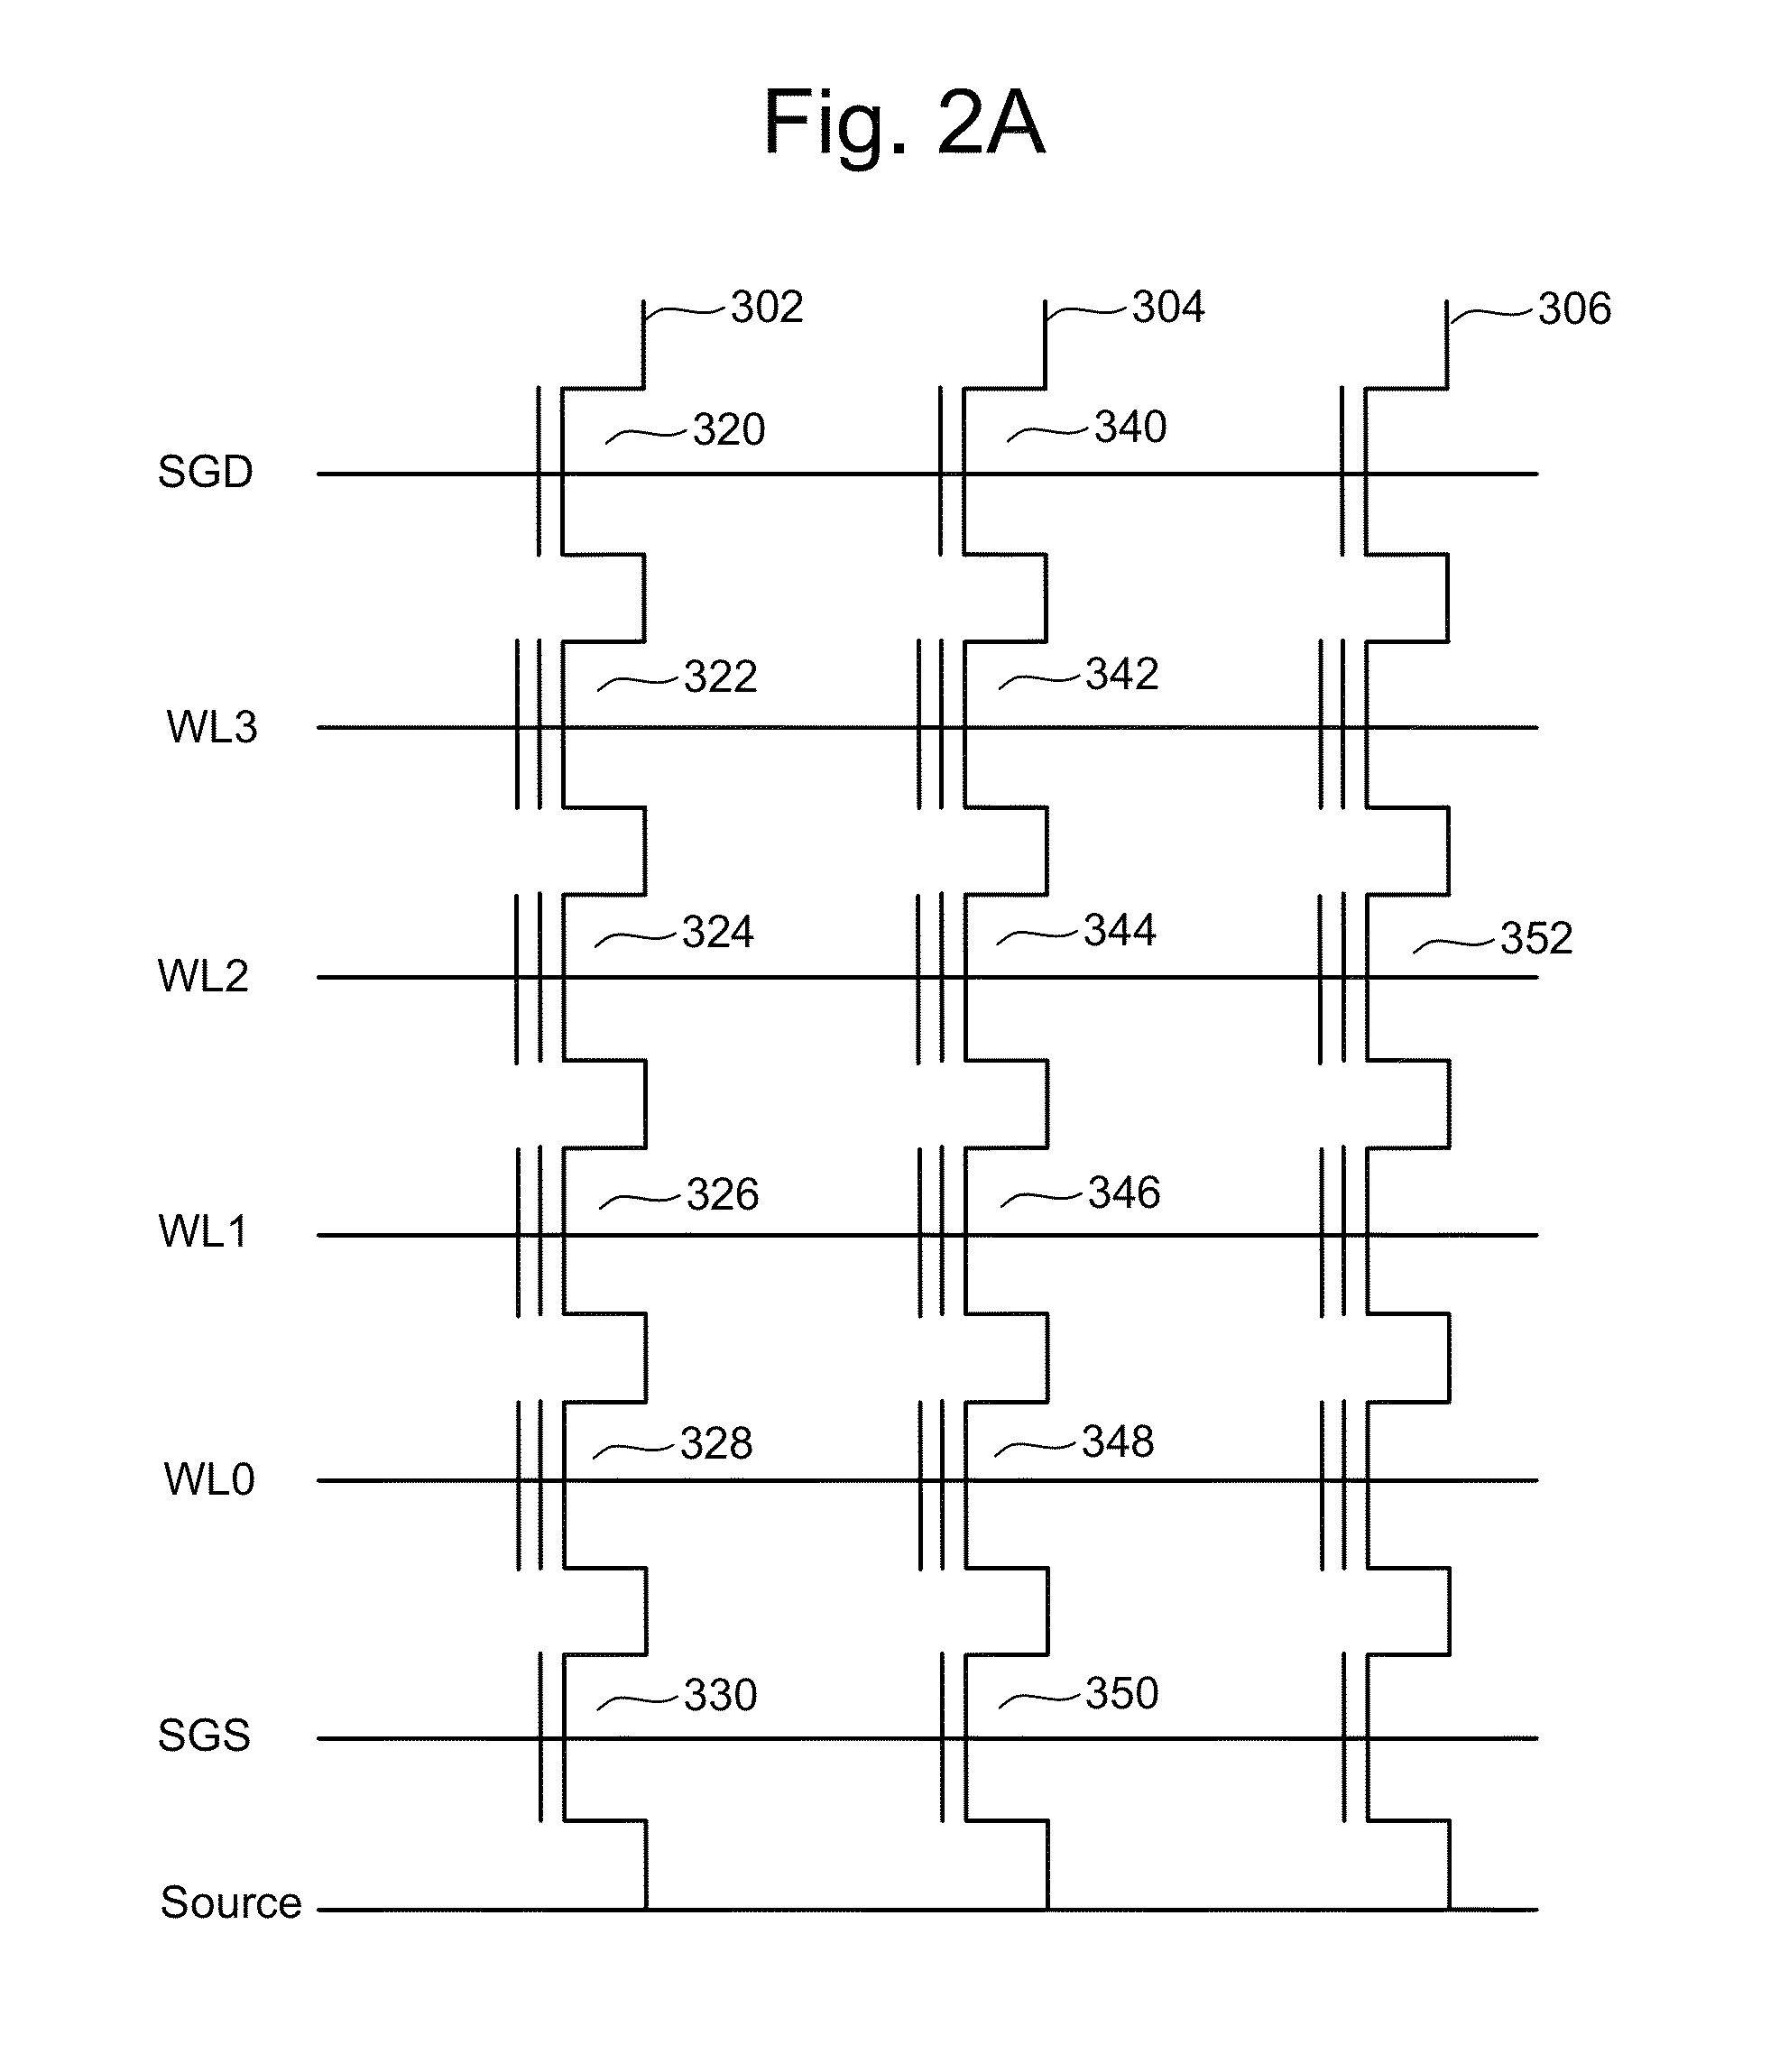 Single-level cell endurance improvement with pre-defined blocks